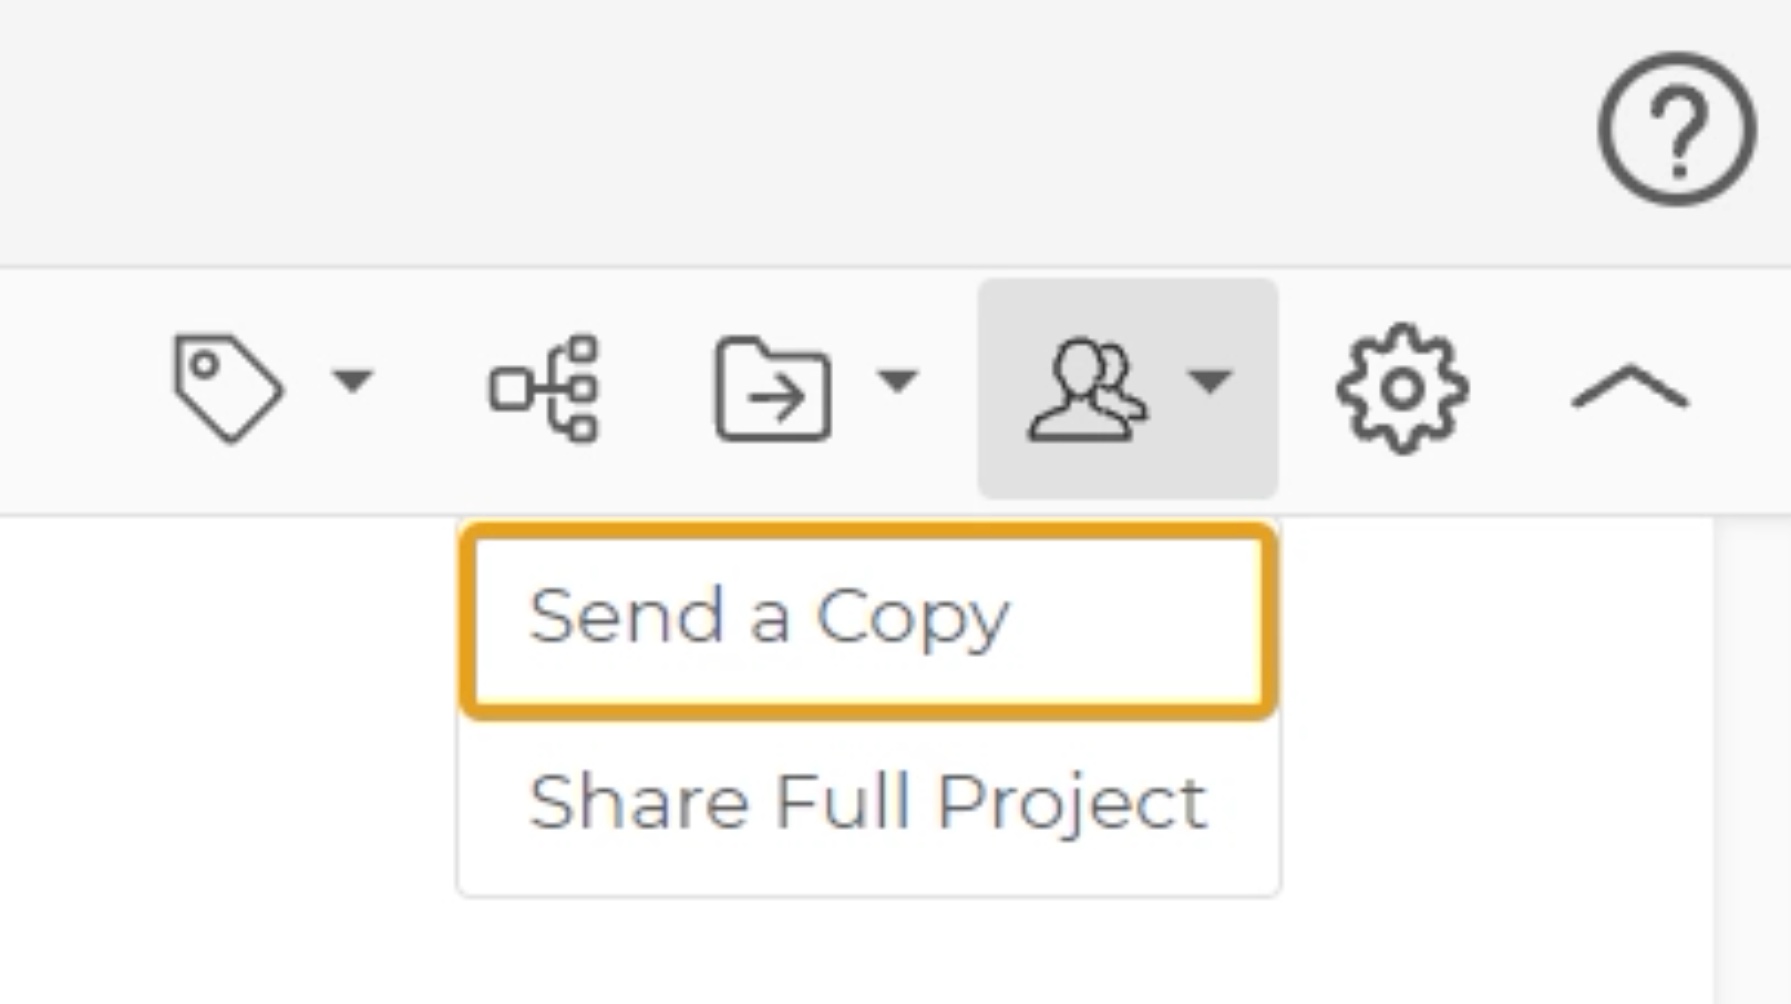 Choose option "Send a Copy" from the drop down.